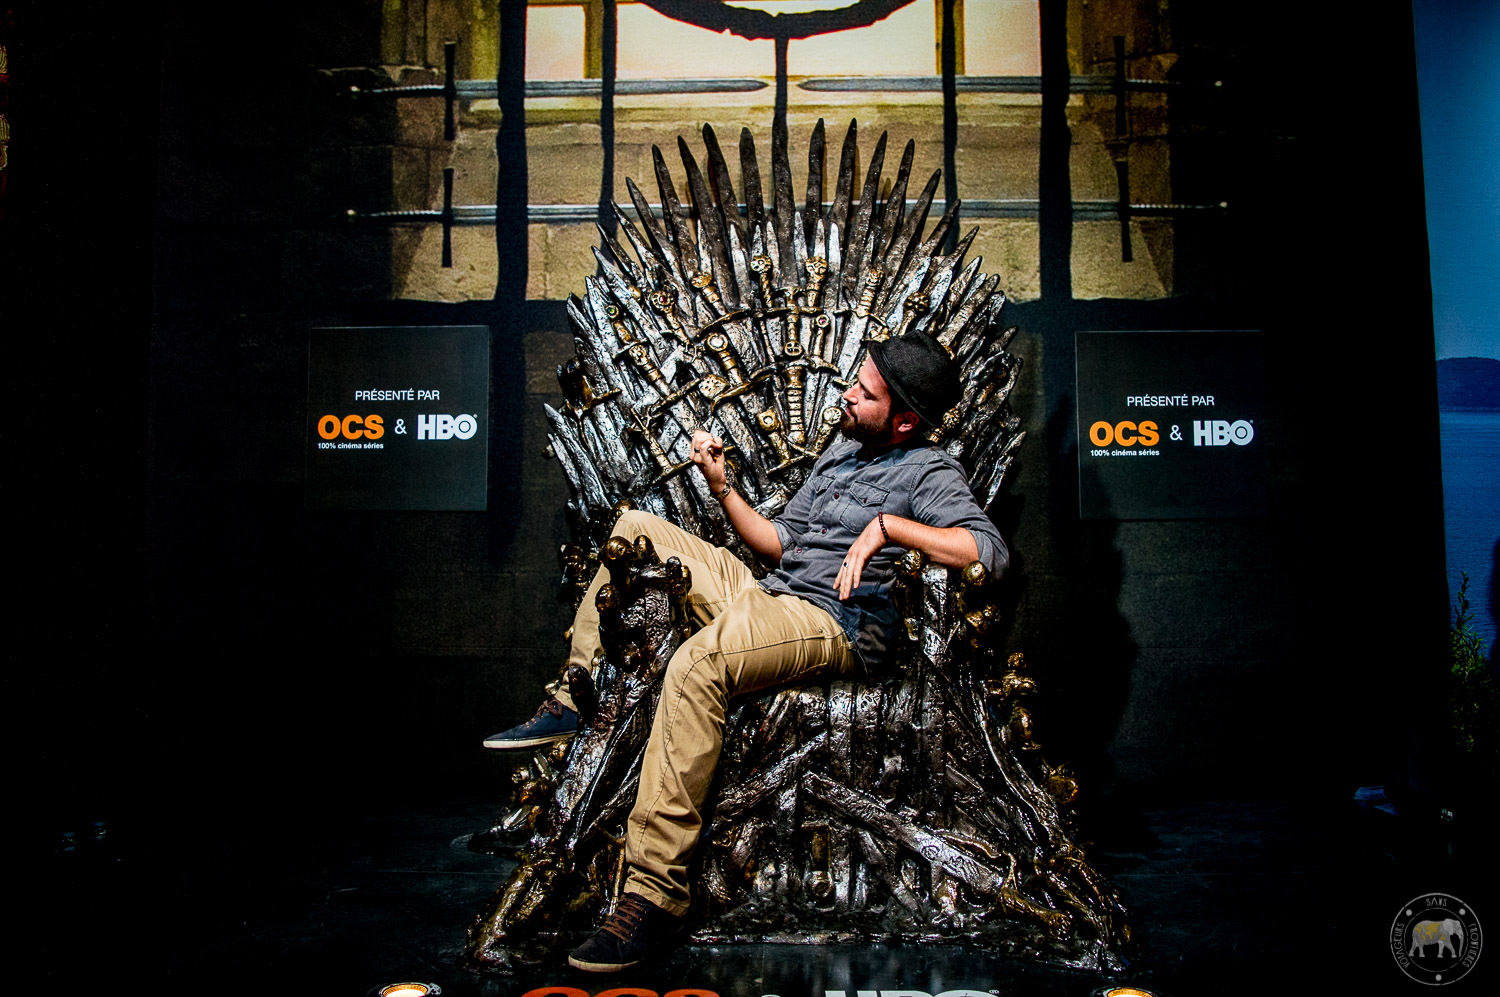 Séb sitting on the iron throne at the Game of Thrones exhibit - Paris, France